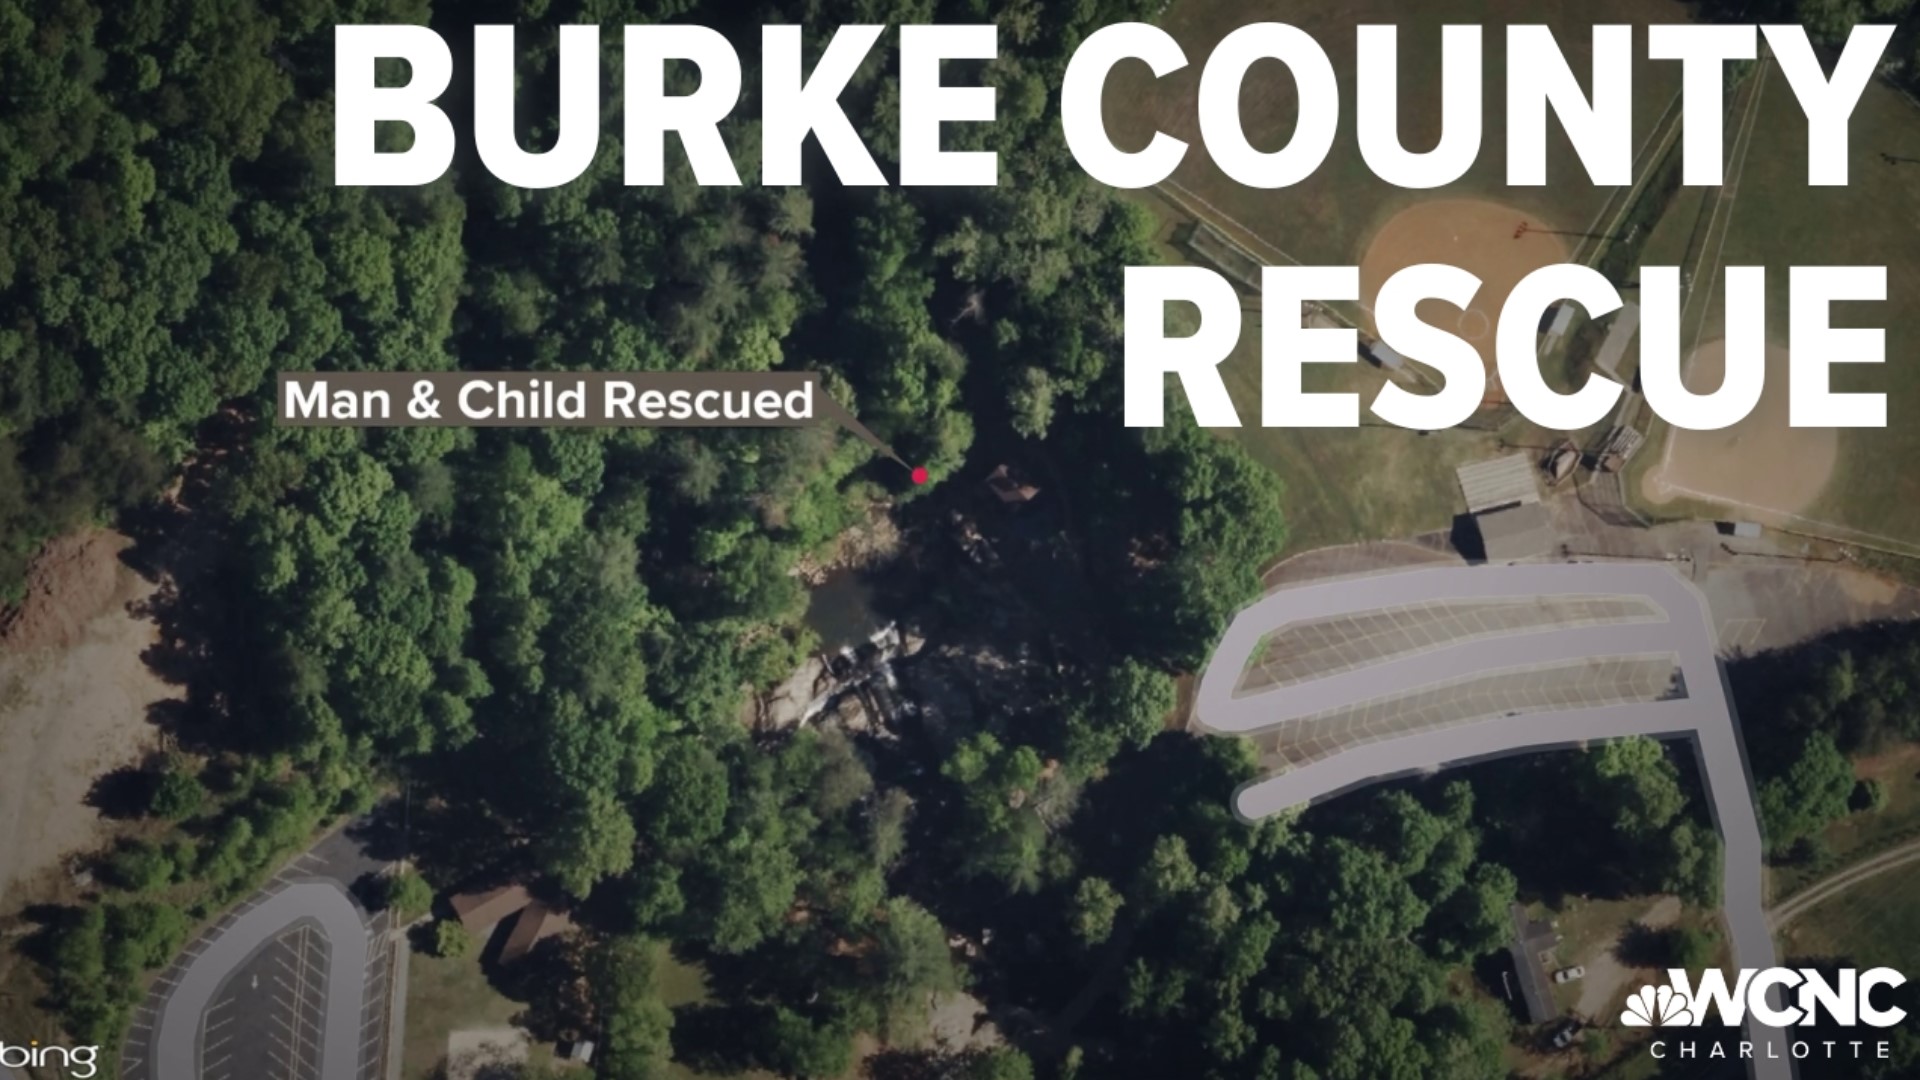 The Burke County Emergency Communications Center received a 911 call around 8 a.m. after the incident, reporting that three people had slid roughly 20 feet.